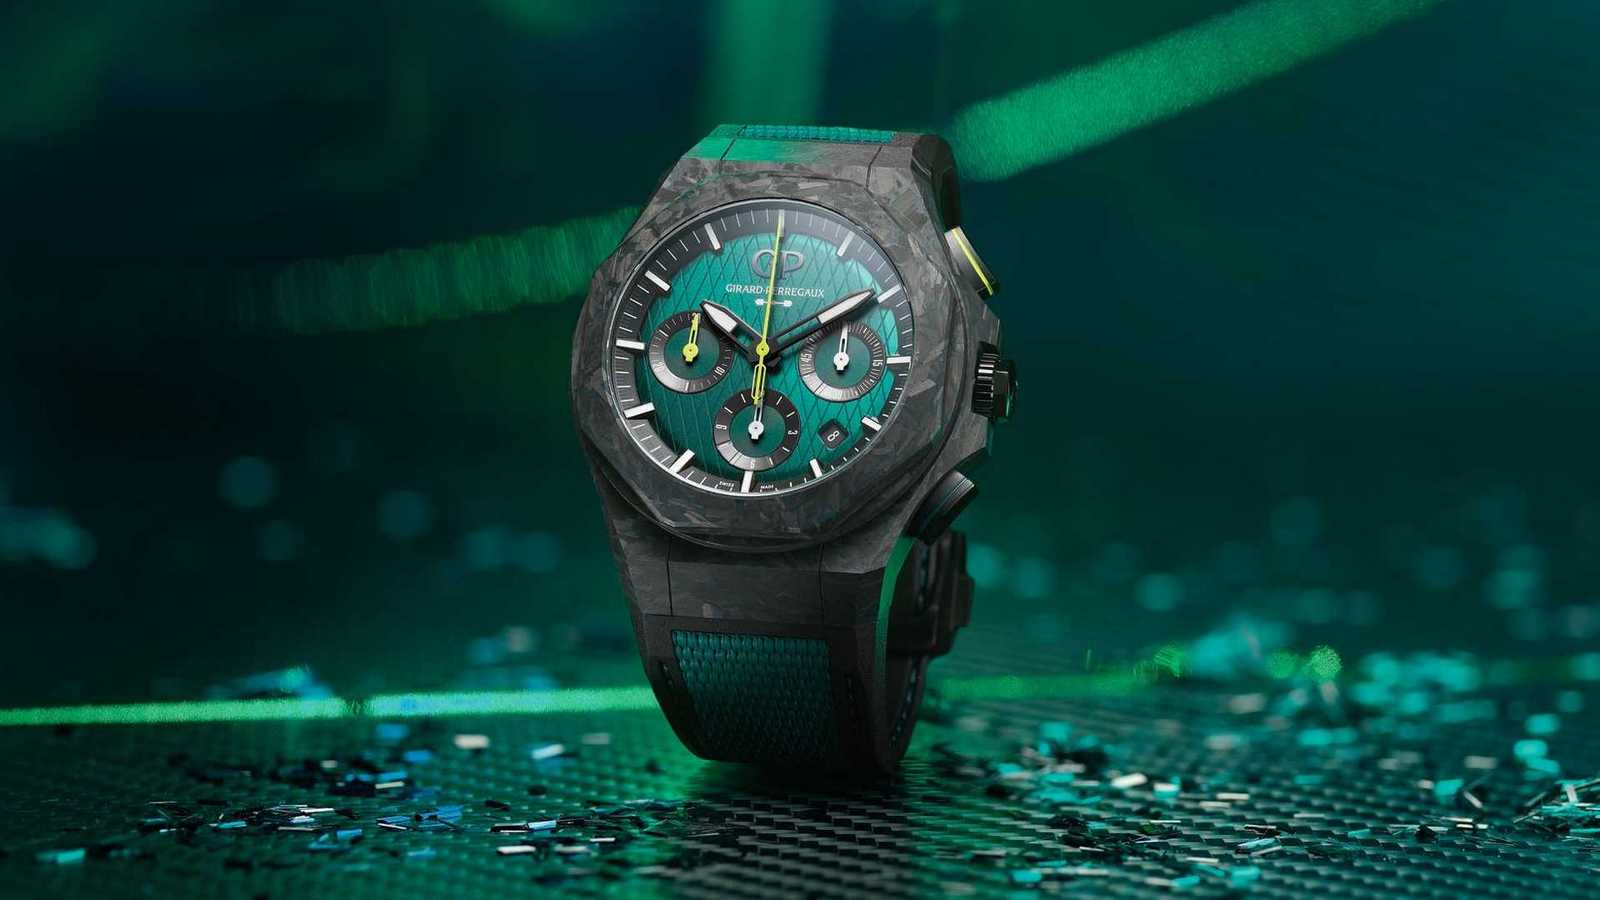 Girard-Perregaux has released a limited-edition Aston Martin F1 watch that features a bespoke case and strap made from reclaimed carbon fiber